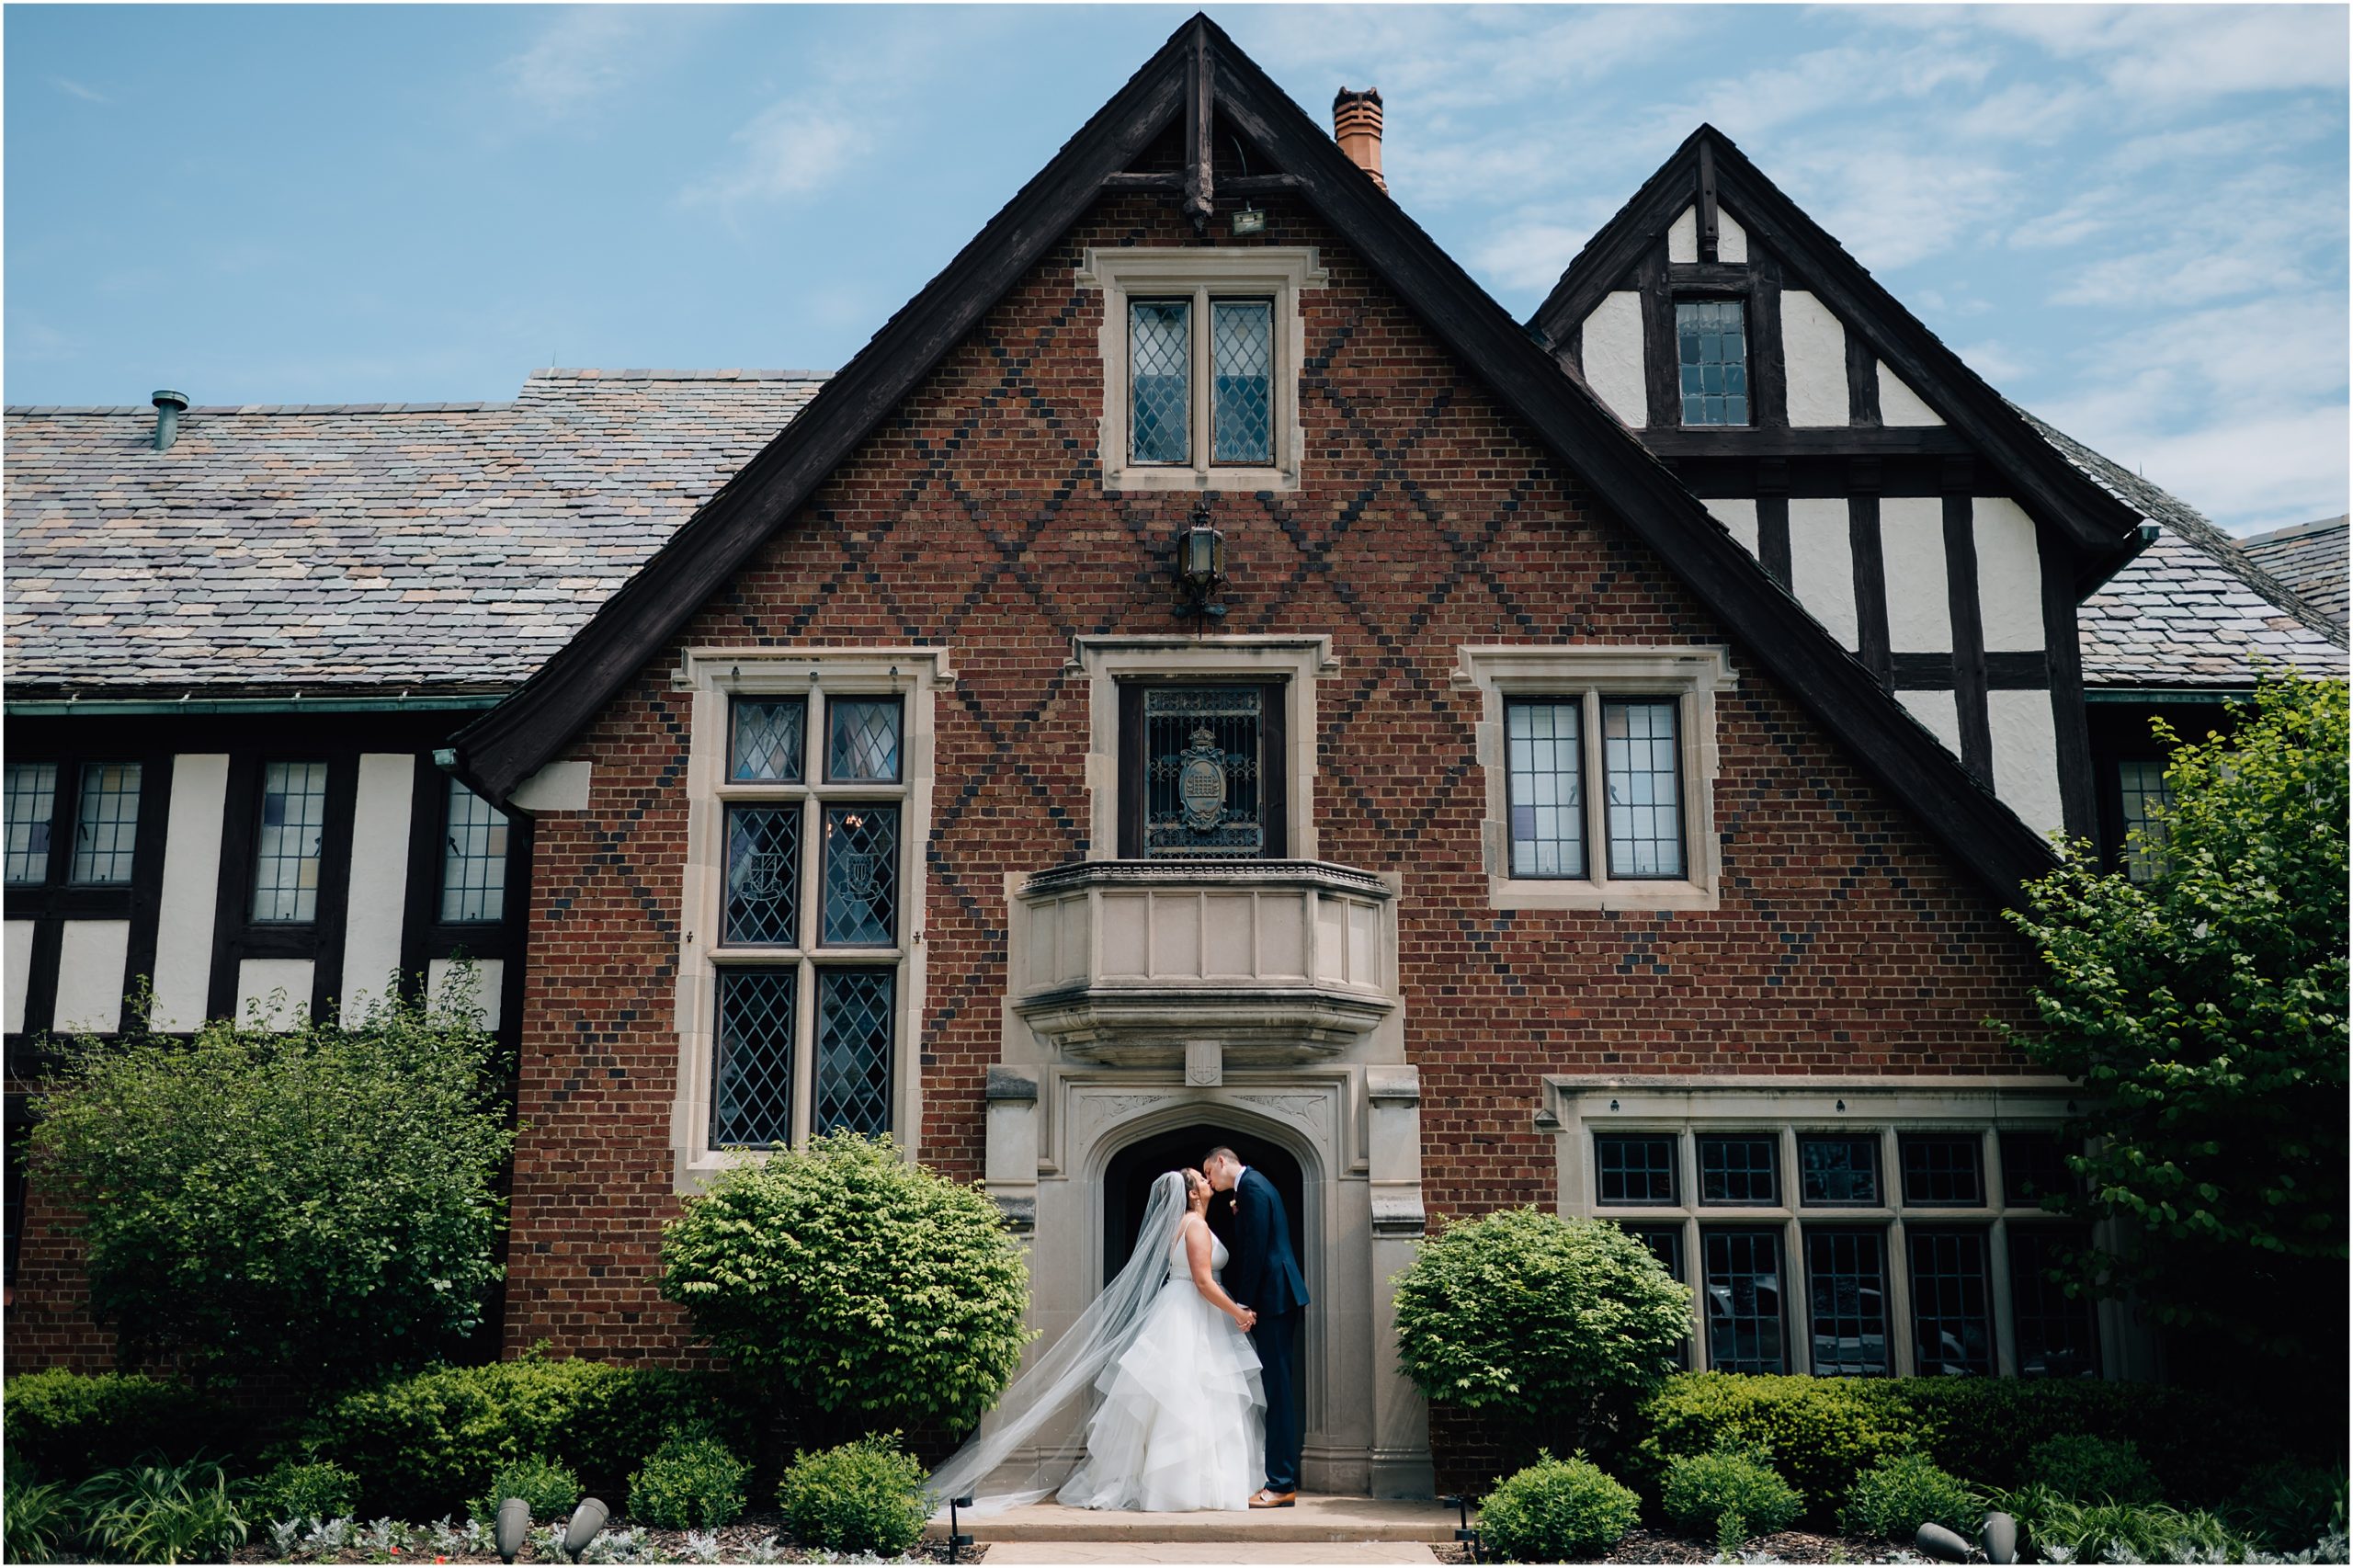 Bride and Groom share a kiss in front of Rollins Mansion. A tudor style hisotrical mansion in Des Moines Iowa. Photo by Anna Brace, who specializes in Omaha NE wedding Photography.